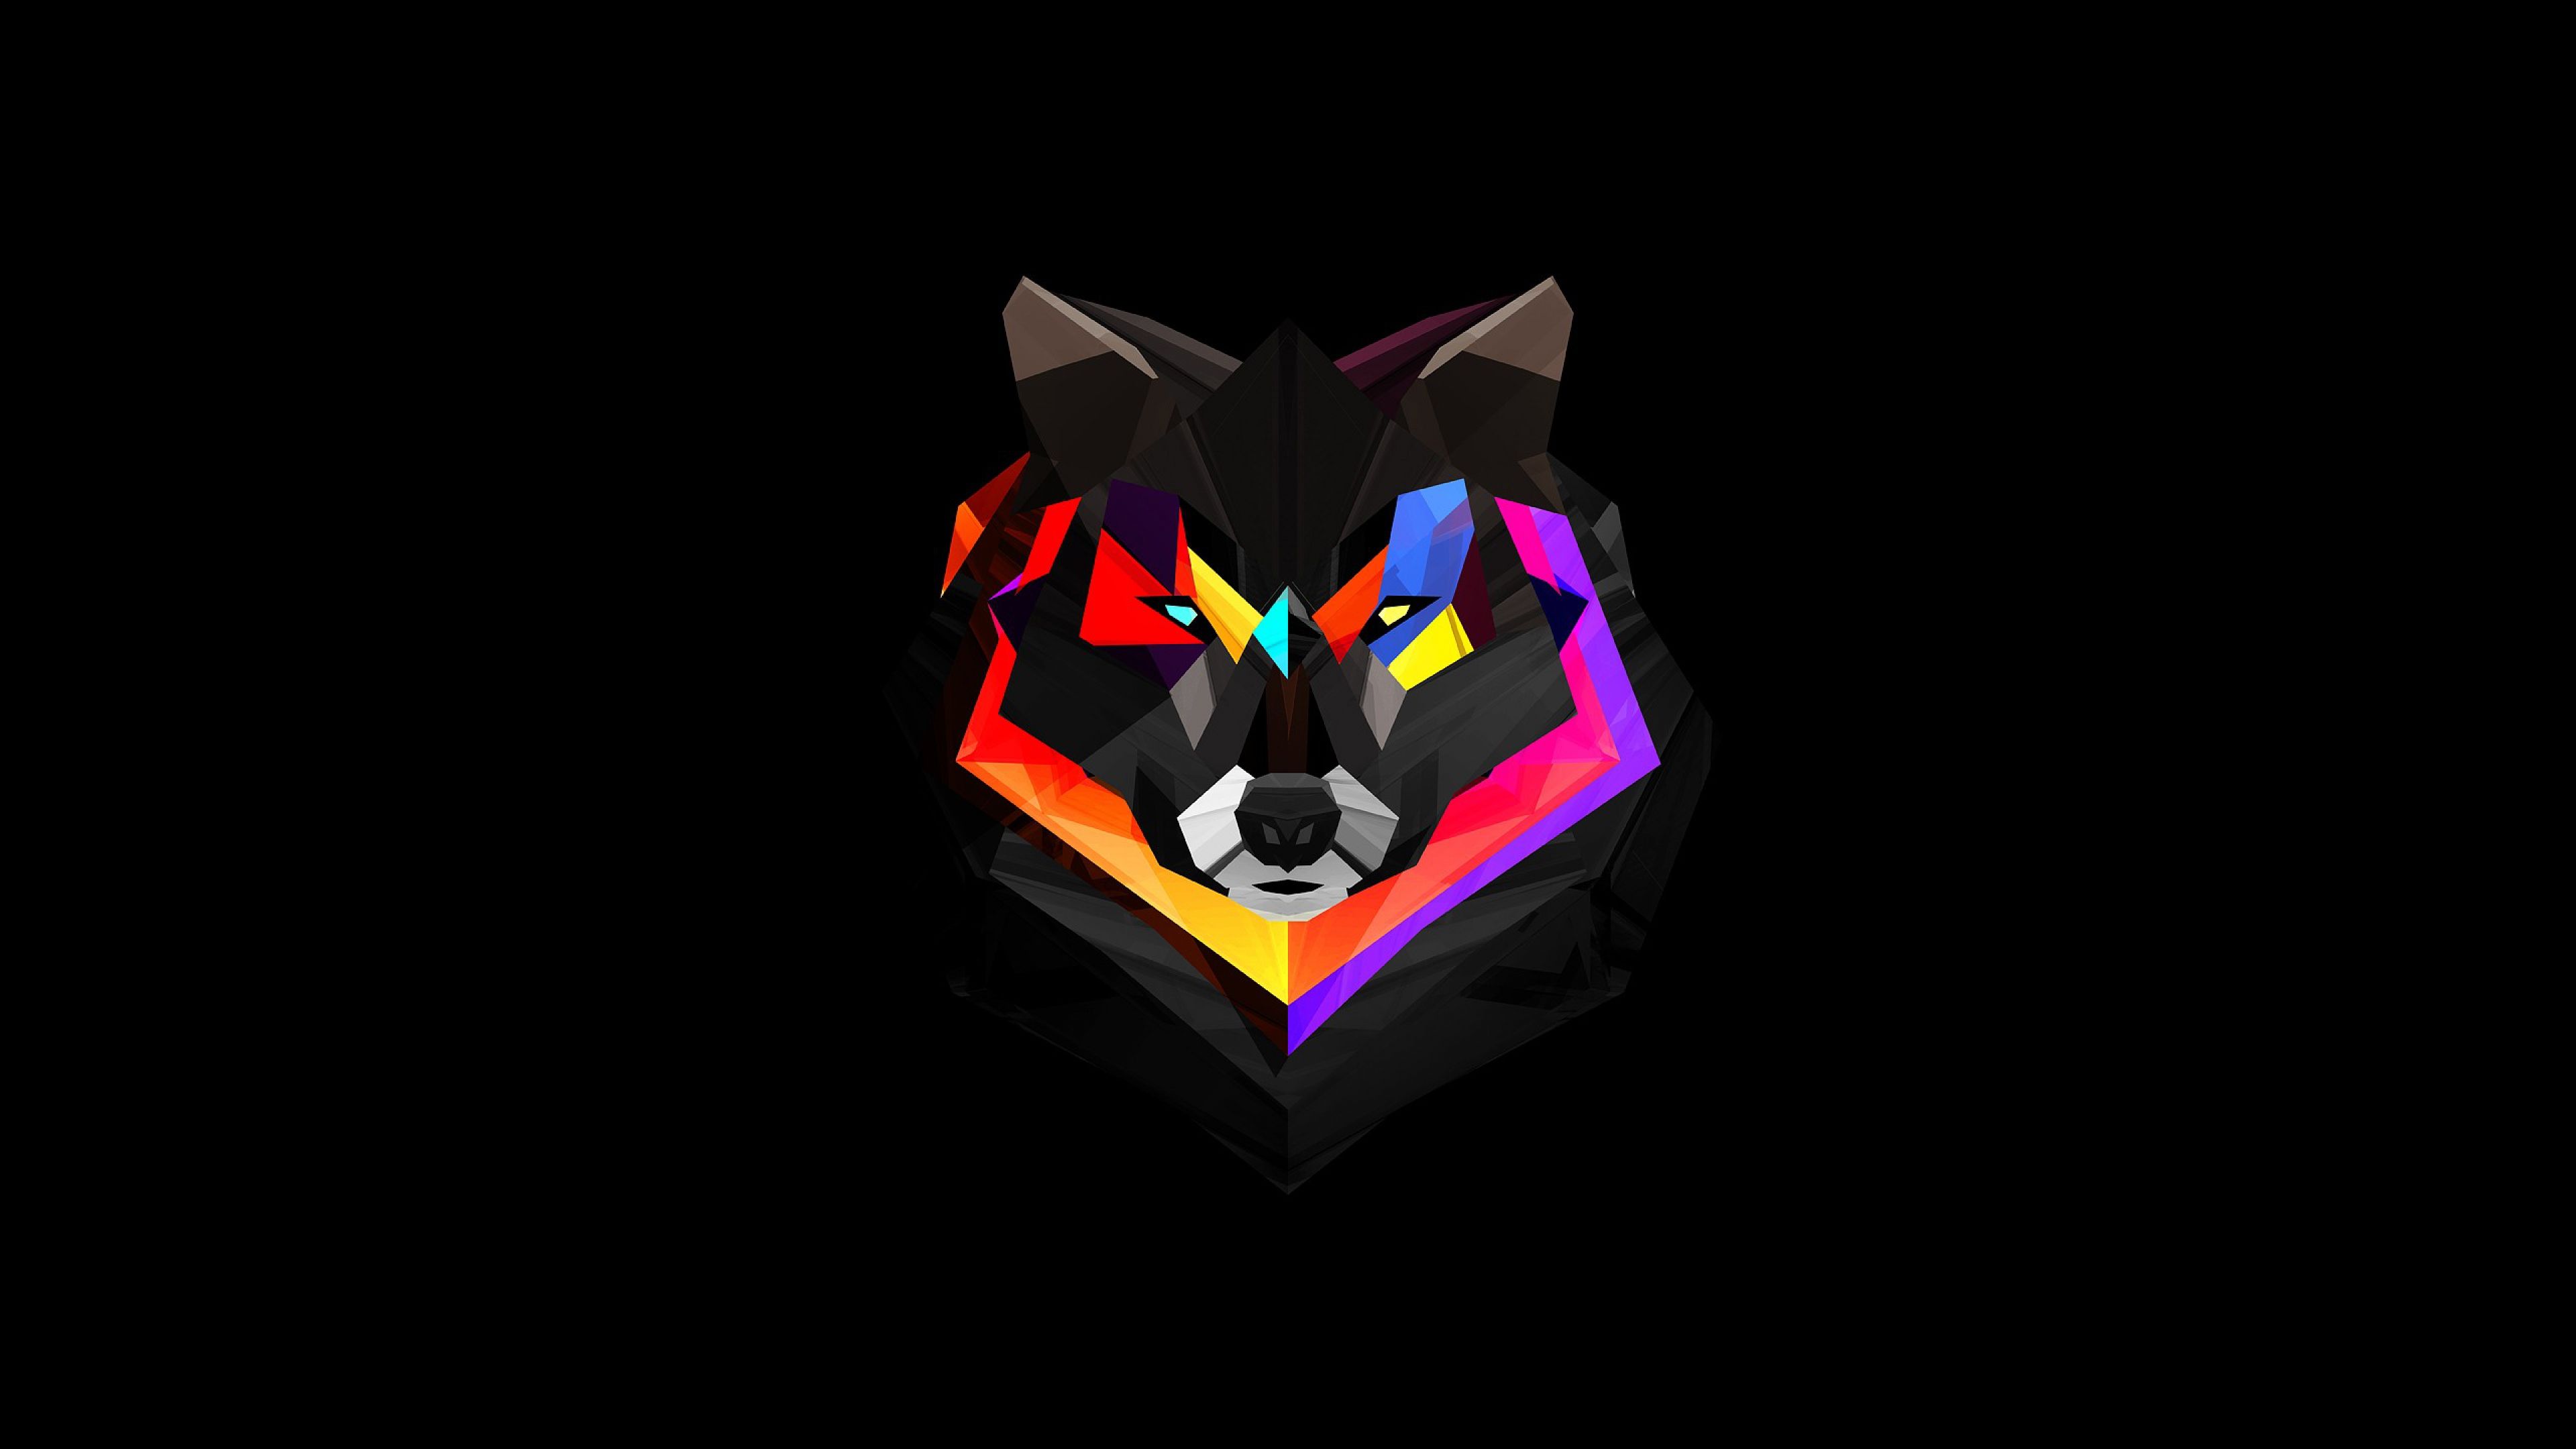 Wolf Face Abstract Colorful 92879 3840x2160 x2160 #Colorful #Face #Wolf h. Geometric animal wallpaper, Wolf wallpaper, Geometric wolf wallpaper